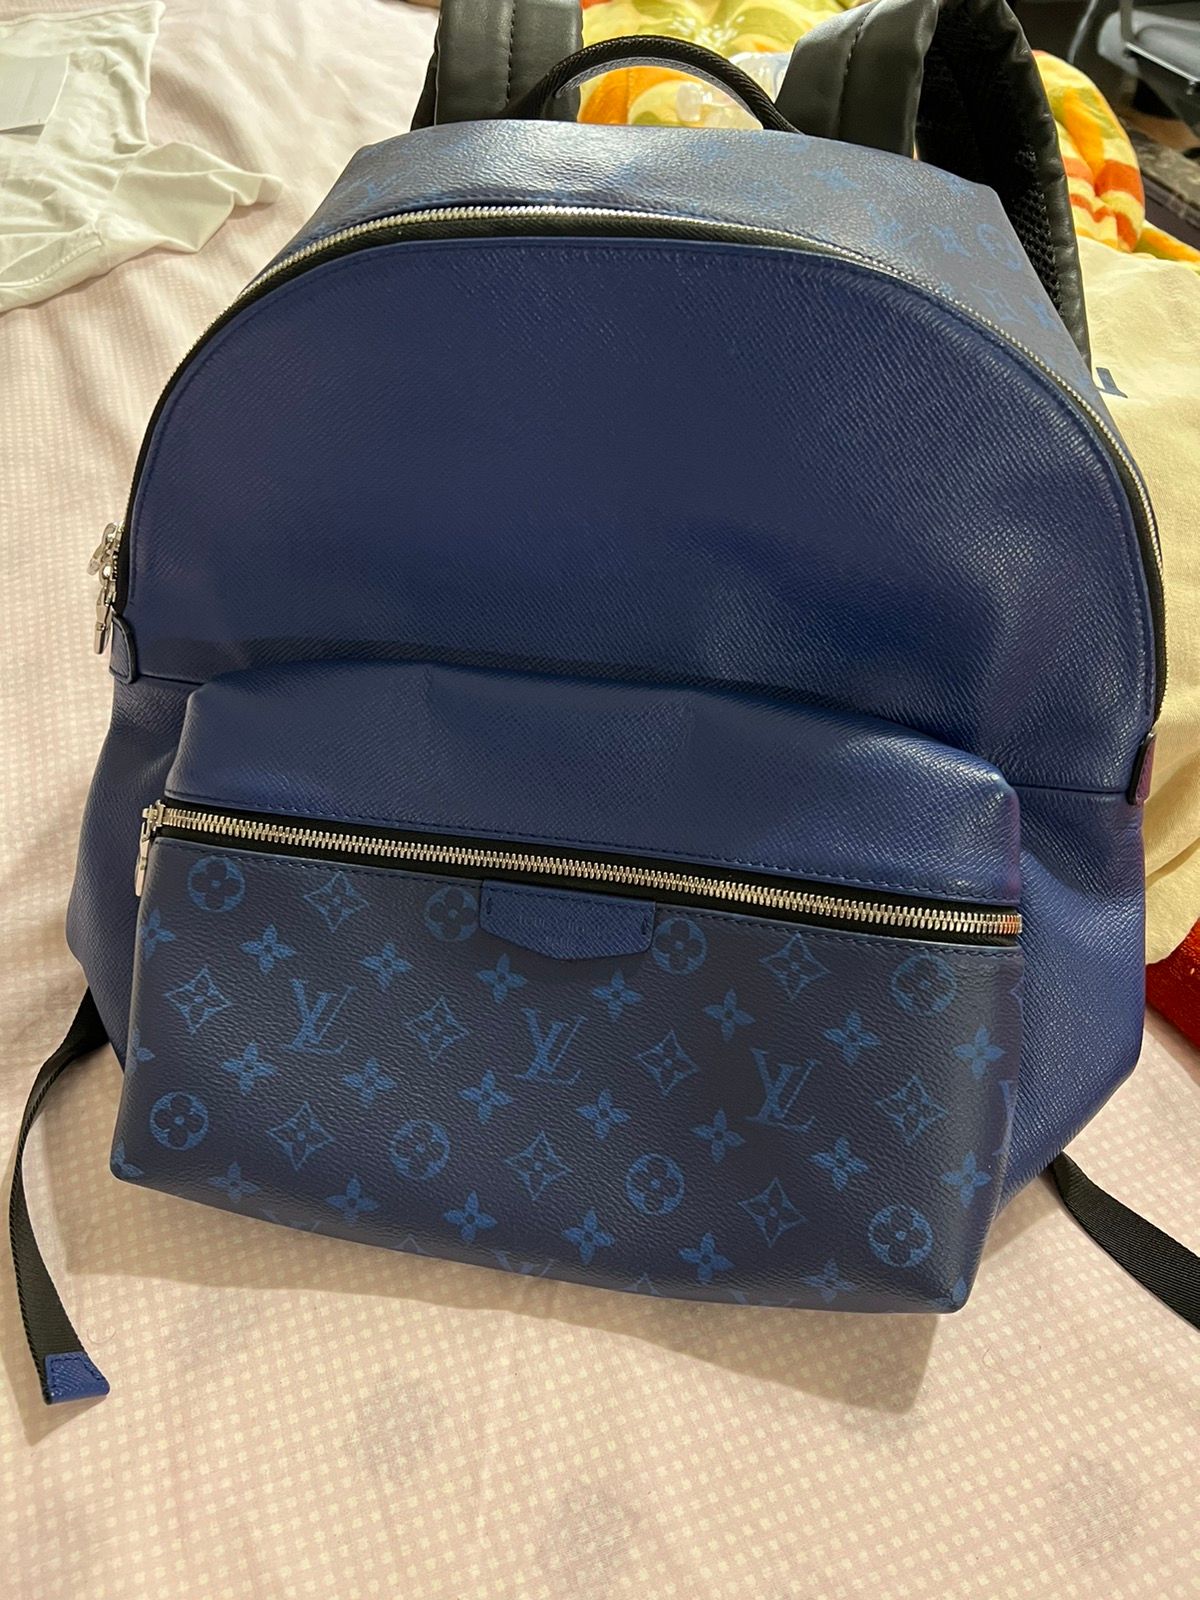 Louis Vuitton Discovery Backpack LV Graffiti Multicolor for Women